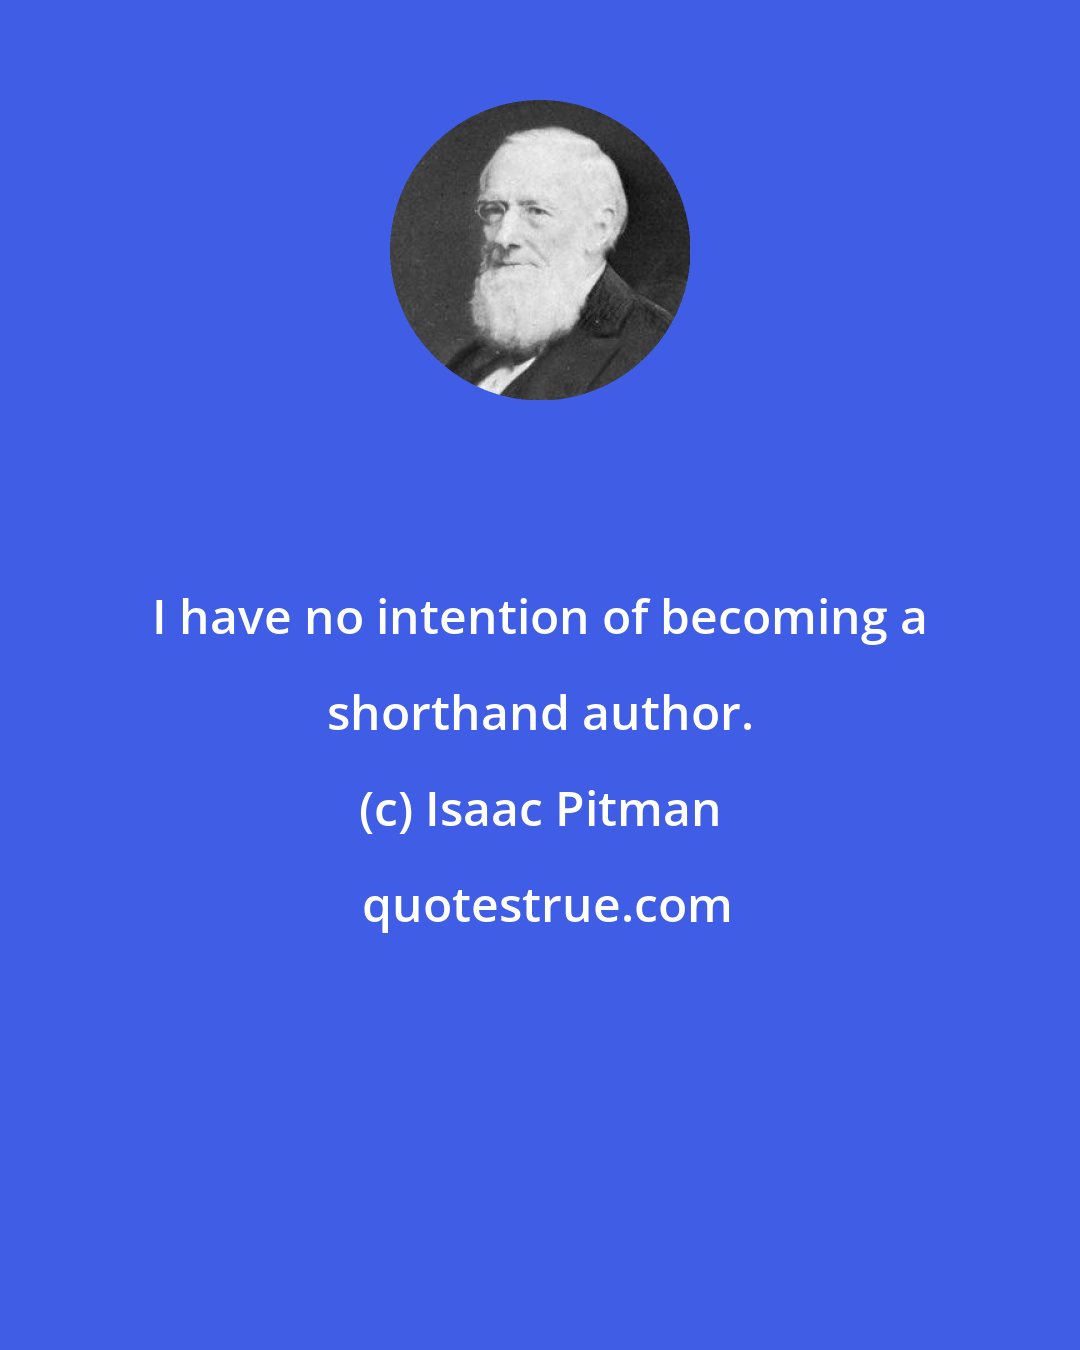 Isaac Pitman: I have no intention of becoming a shorthand author.